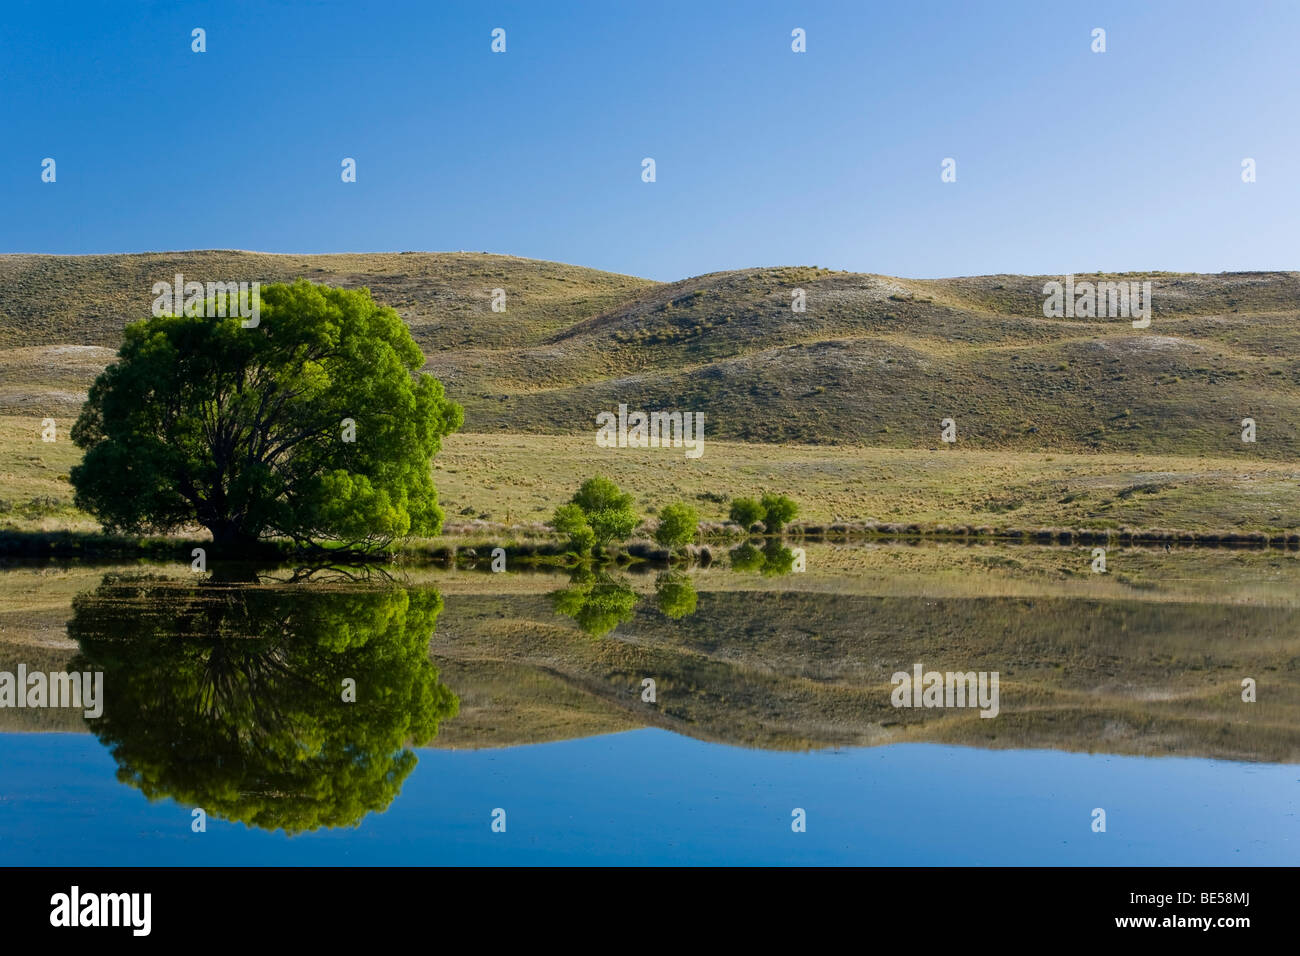 Water reflections of trees and hills on a lake, Hakatere, South Island, New Zealand Stock Photo